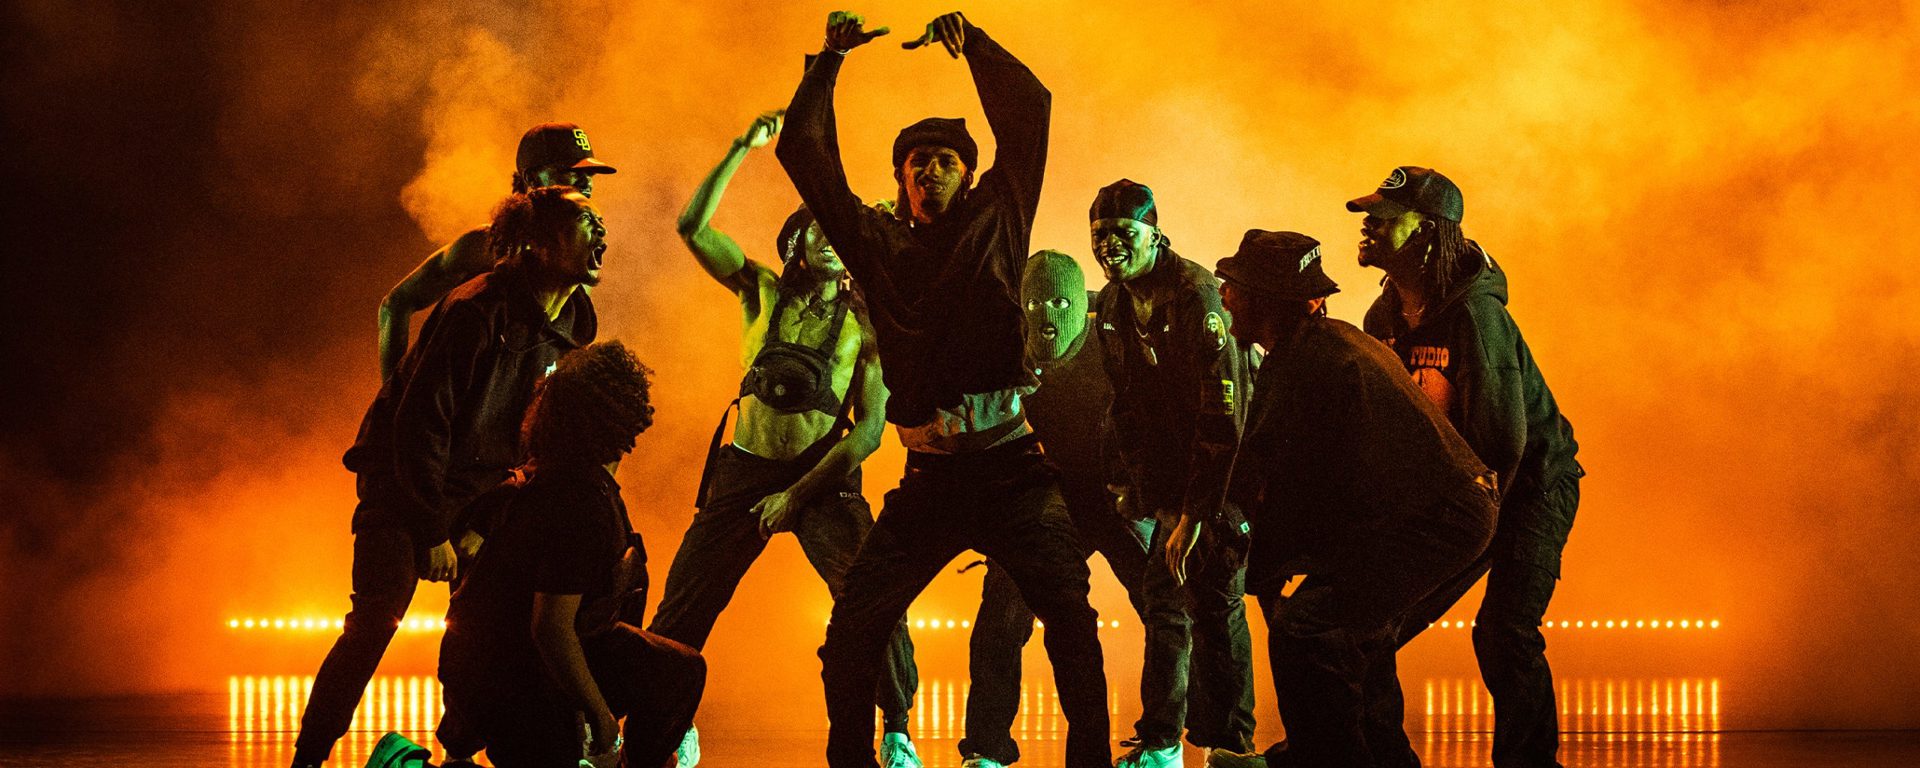 Nine male dancers huddled around eachother shouting and cheering at central dancer who has his arms in the air. All wearing dark clothes on a dark stage with orange light over smoke